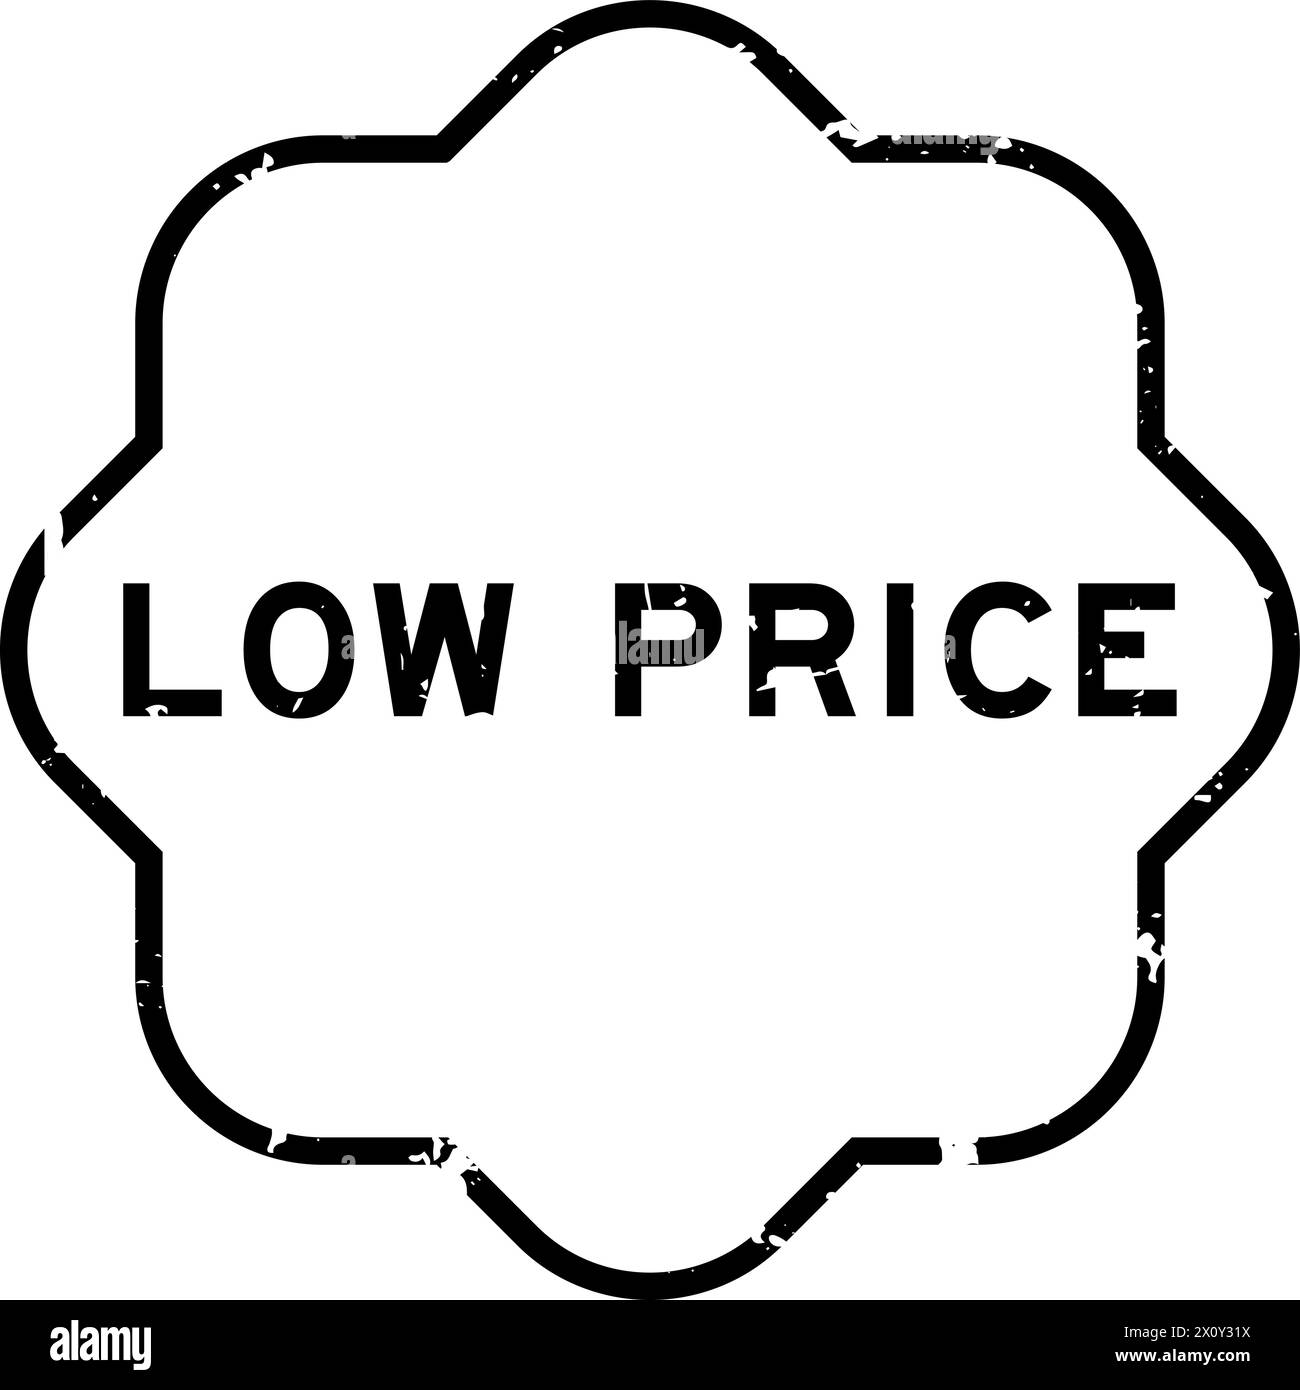 Grunge black low price word rubber seal stamp on white background Stock Vector